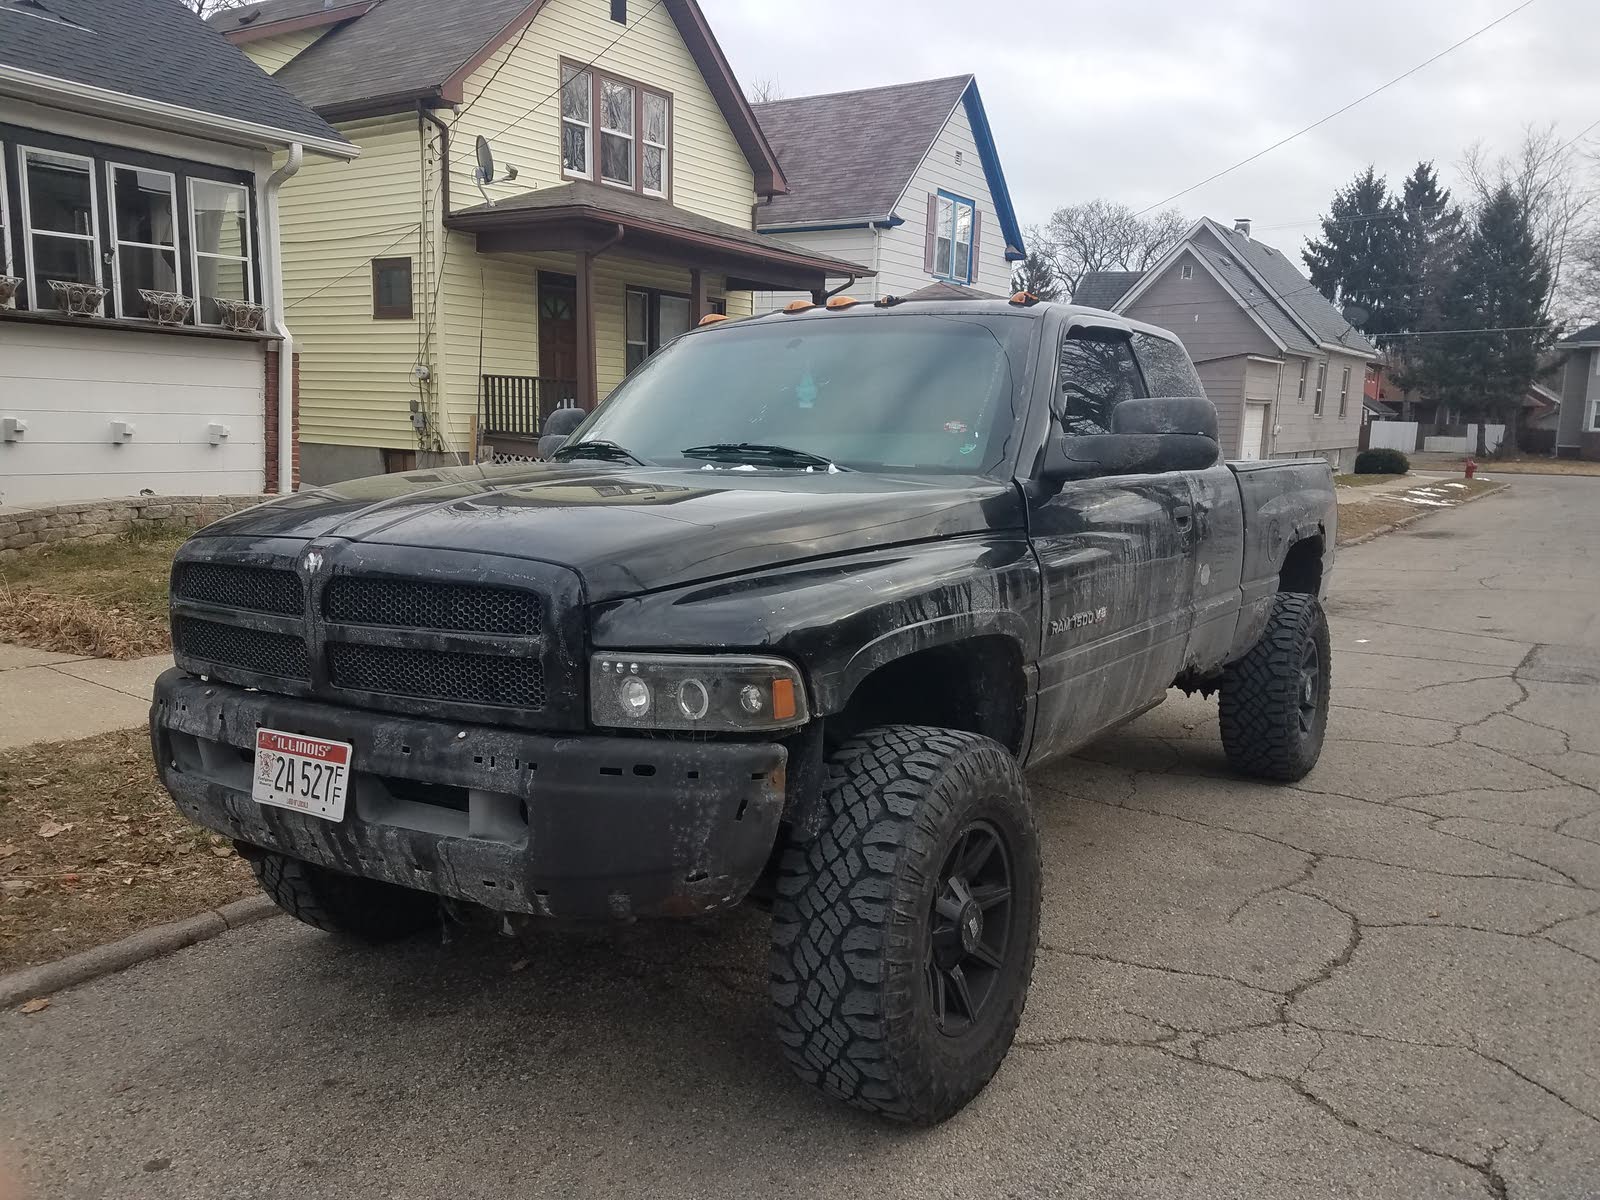 Dodge Ram 1500 Questions How Should I Go About Getting More Hp Cargurus